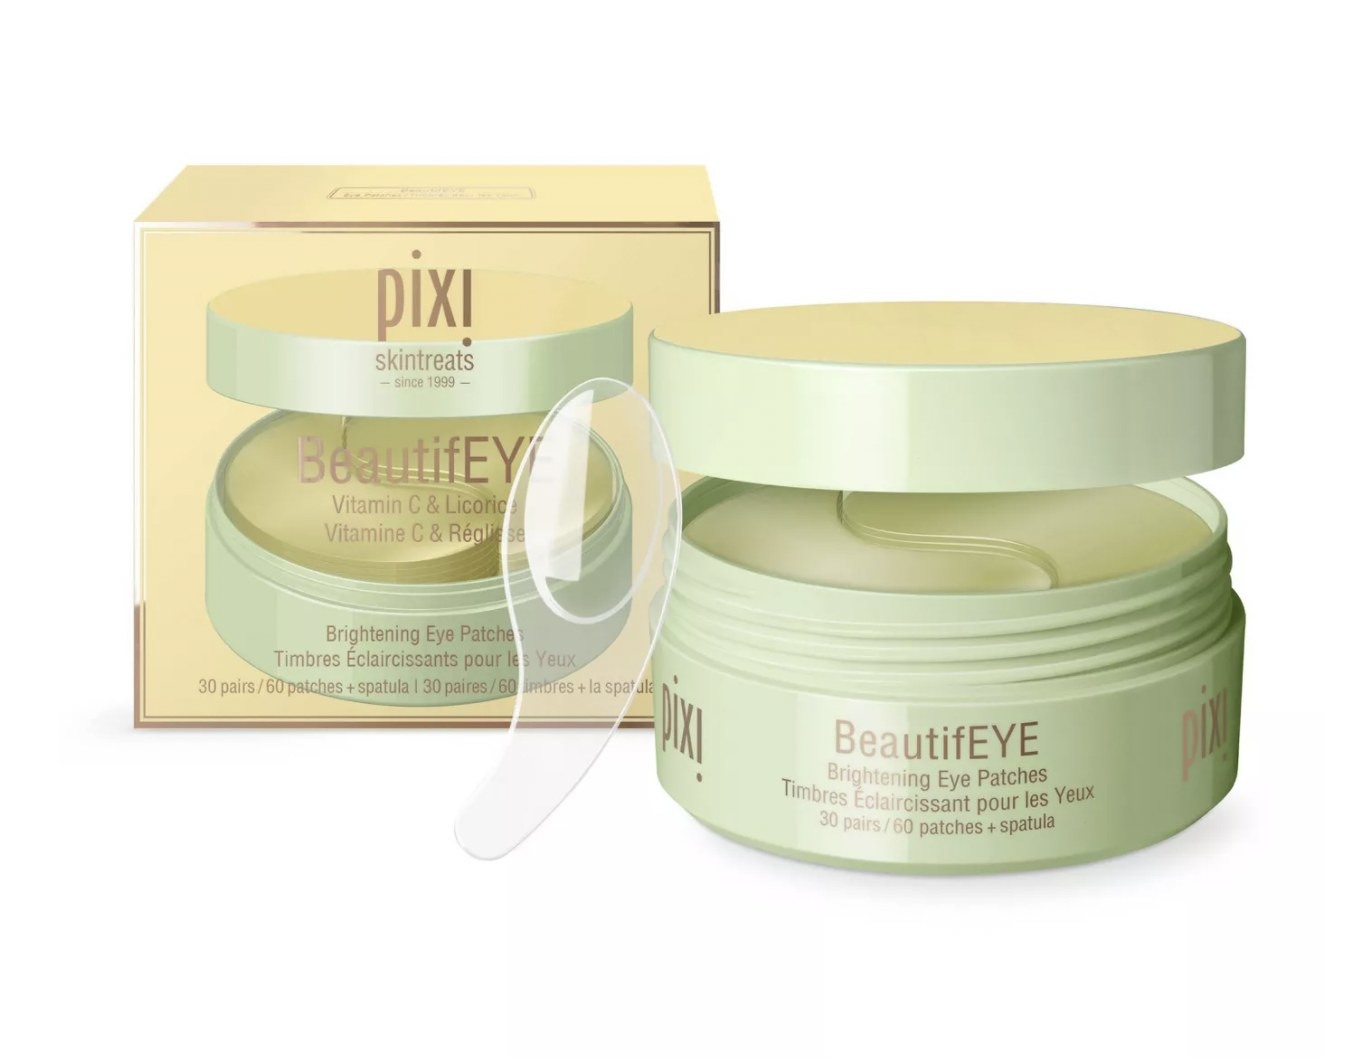 Pixie Beauty green brightening eye patches packaging, container and patch